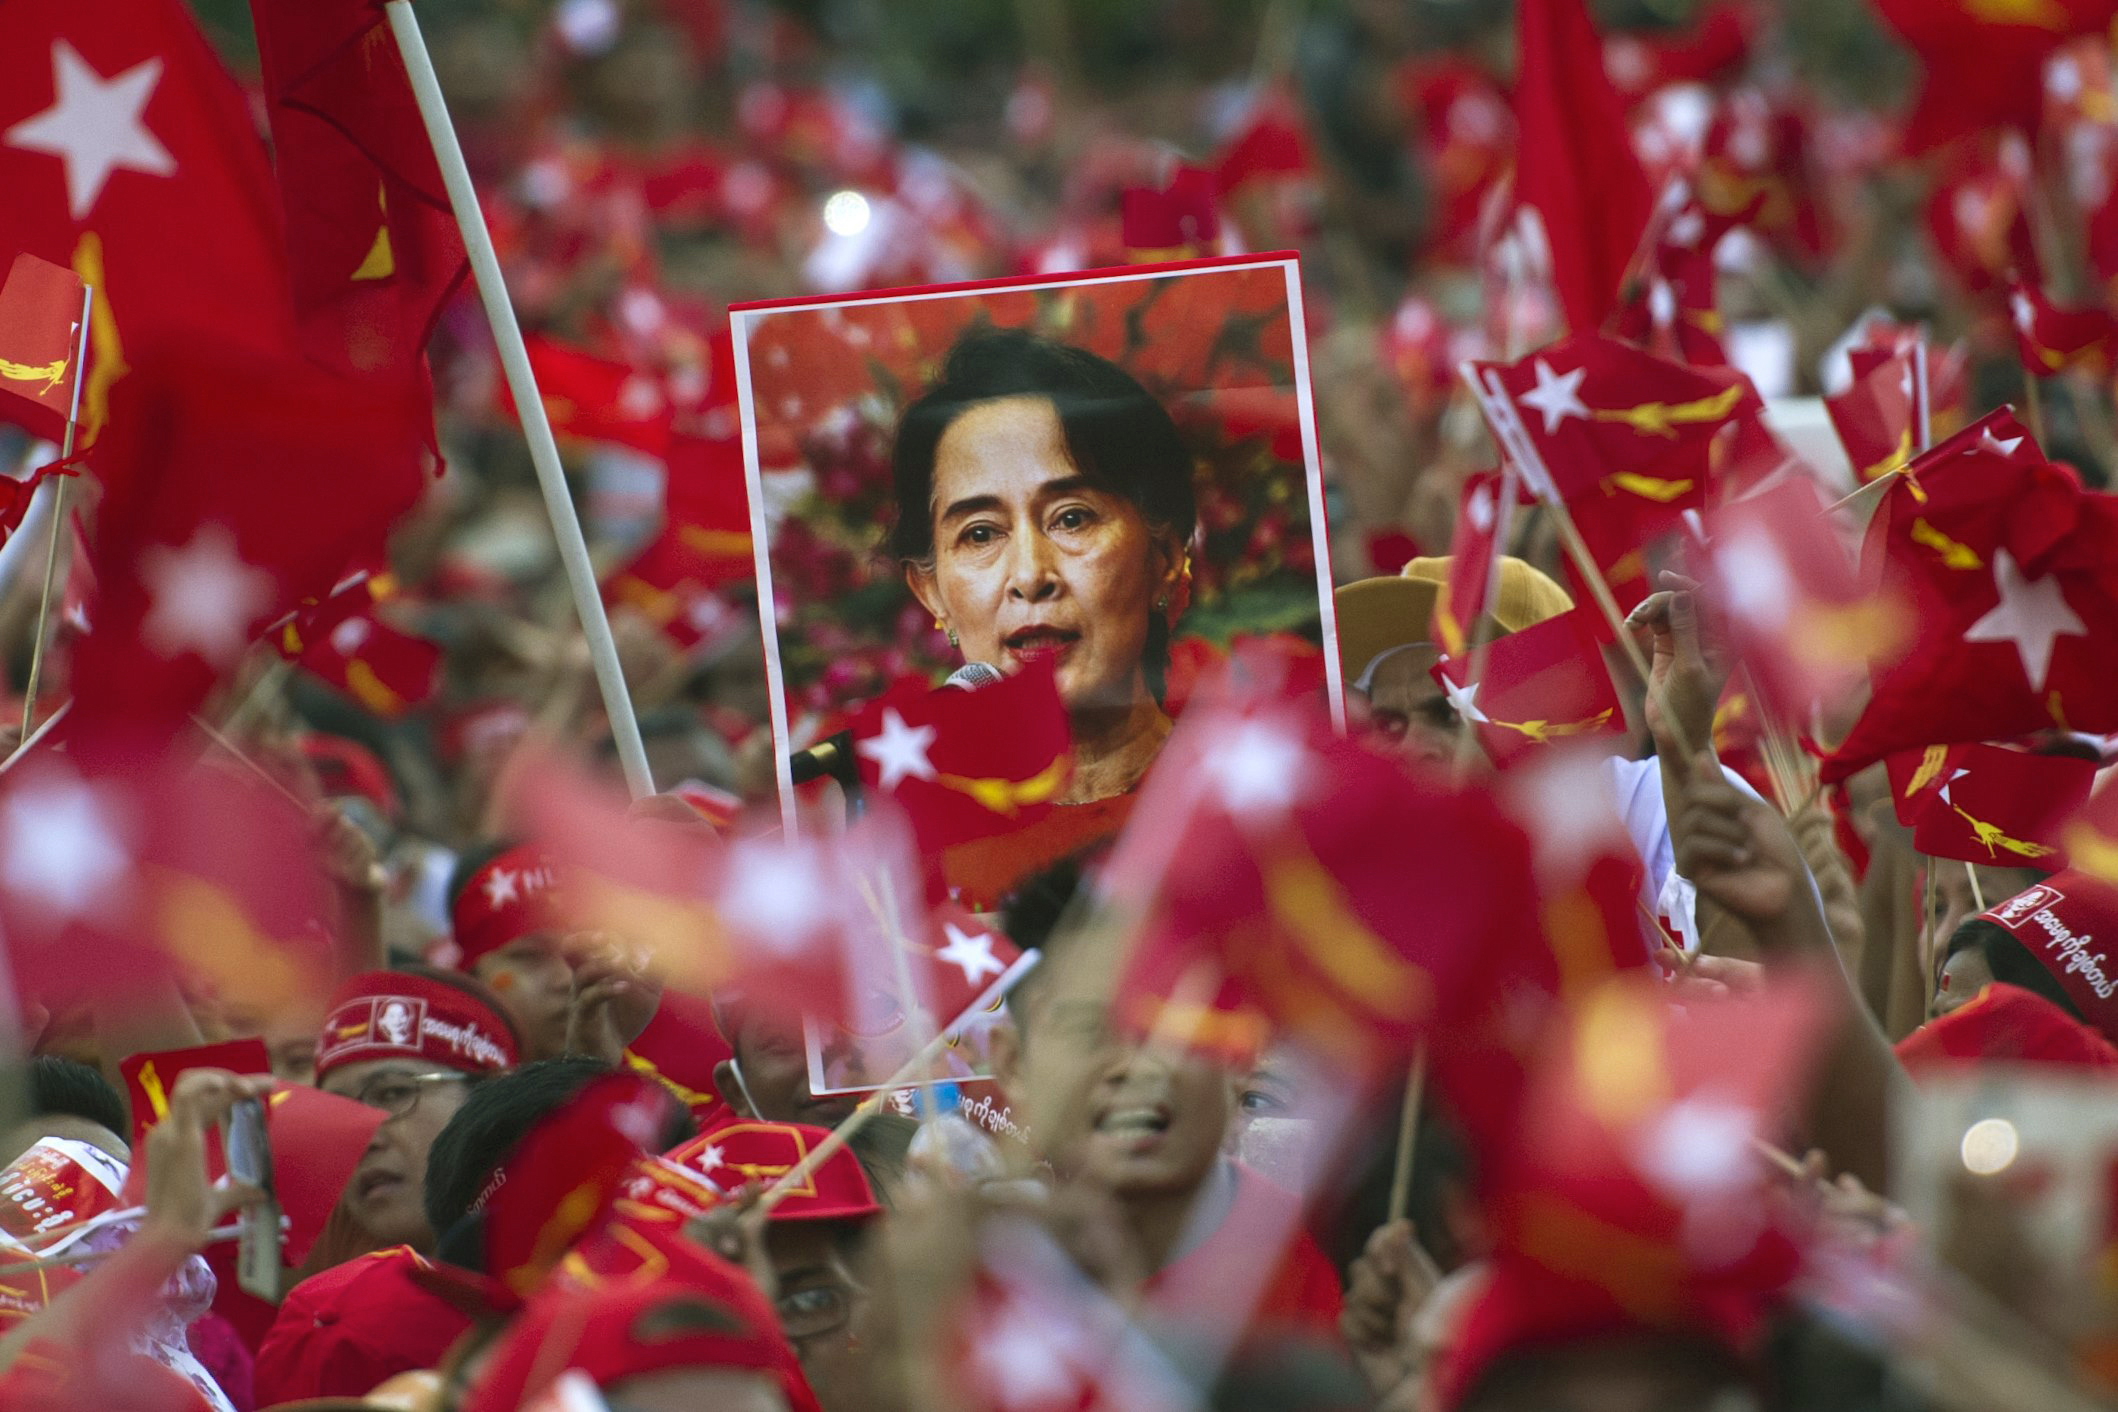 Supporters of opposition leader Aung San Suu Kyi hold posters bearing her image as they listen during a campaign speech in Yangon, Myanmar, on Nov. 1, 2015 (Ye Aung Thu—AFP/Getty Images)